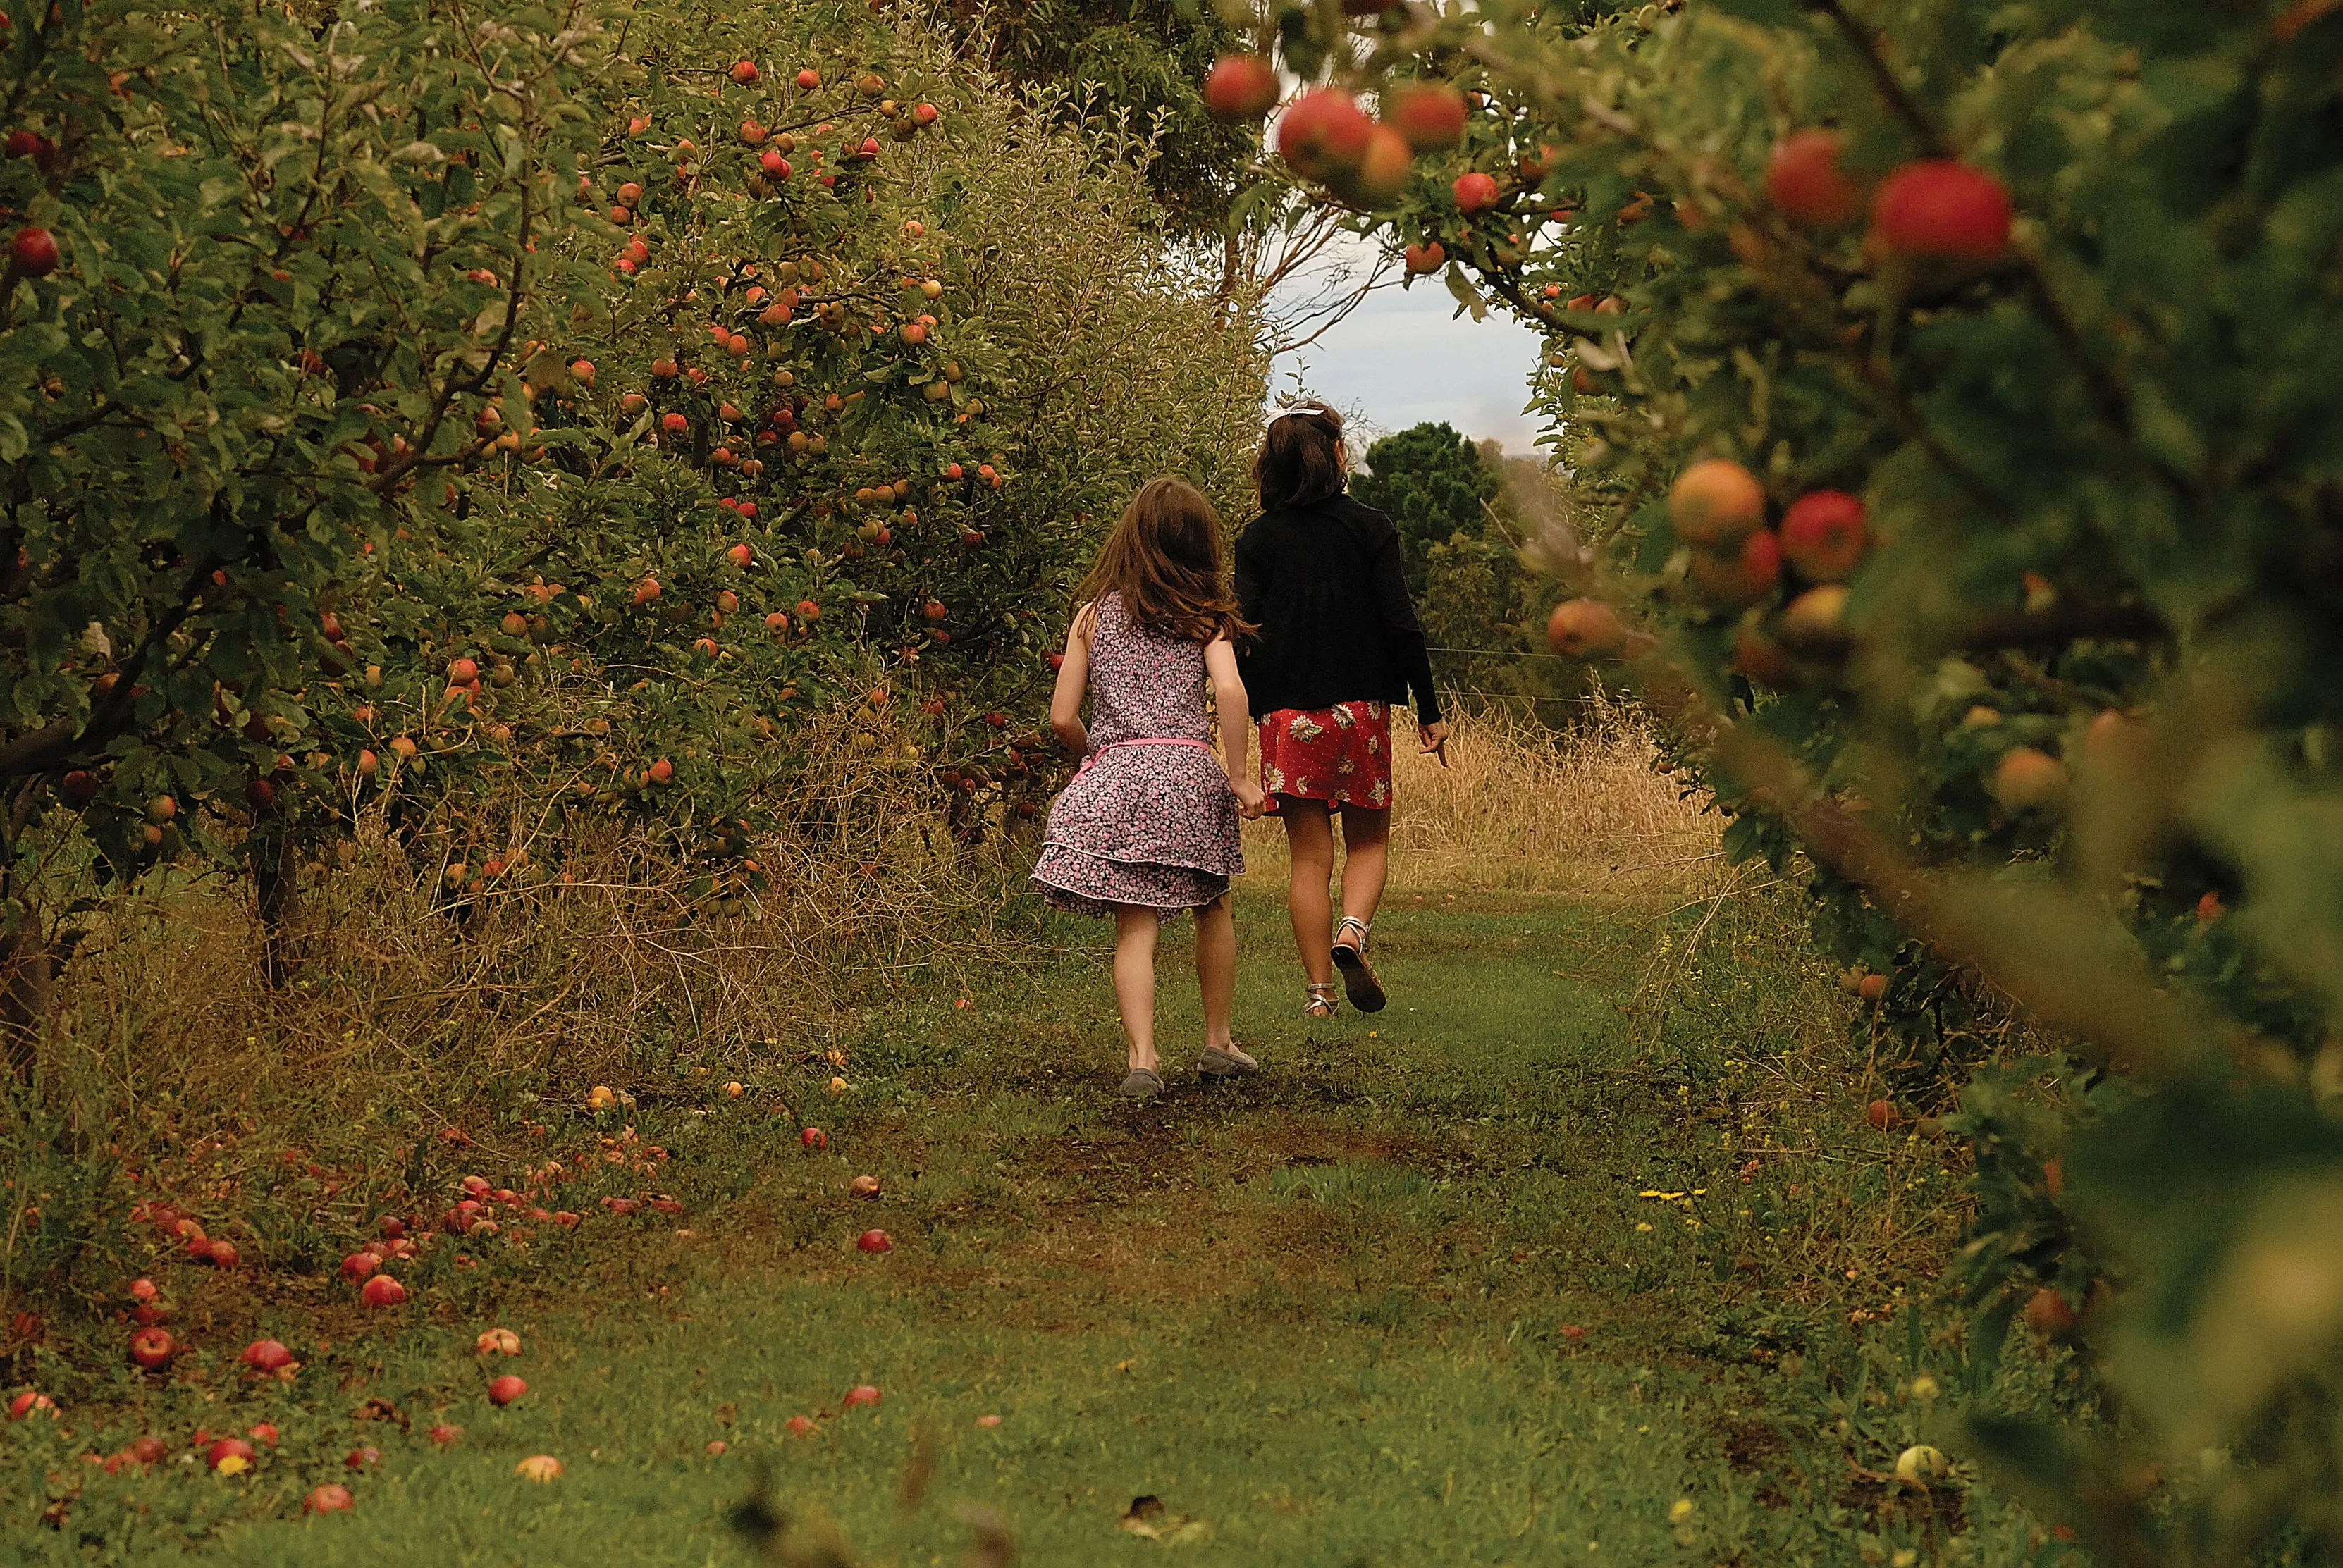 Two children skip between the fruit trees at Sorell Fruit Farm, fruit is all over the trees and fallen to the floow around them.